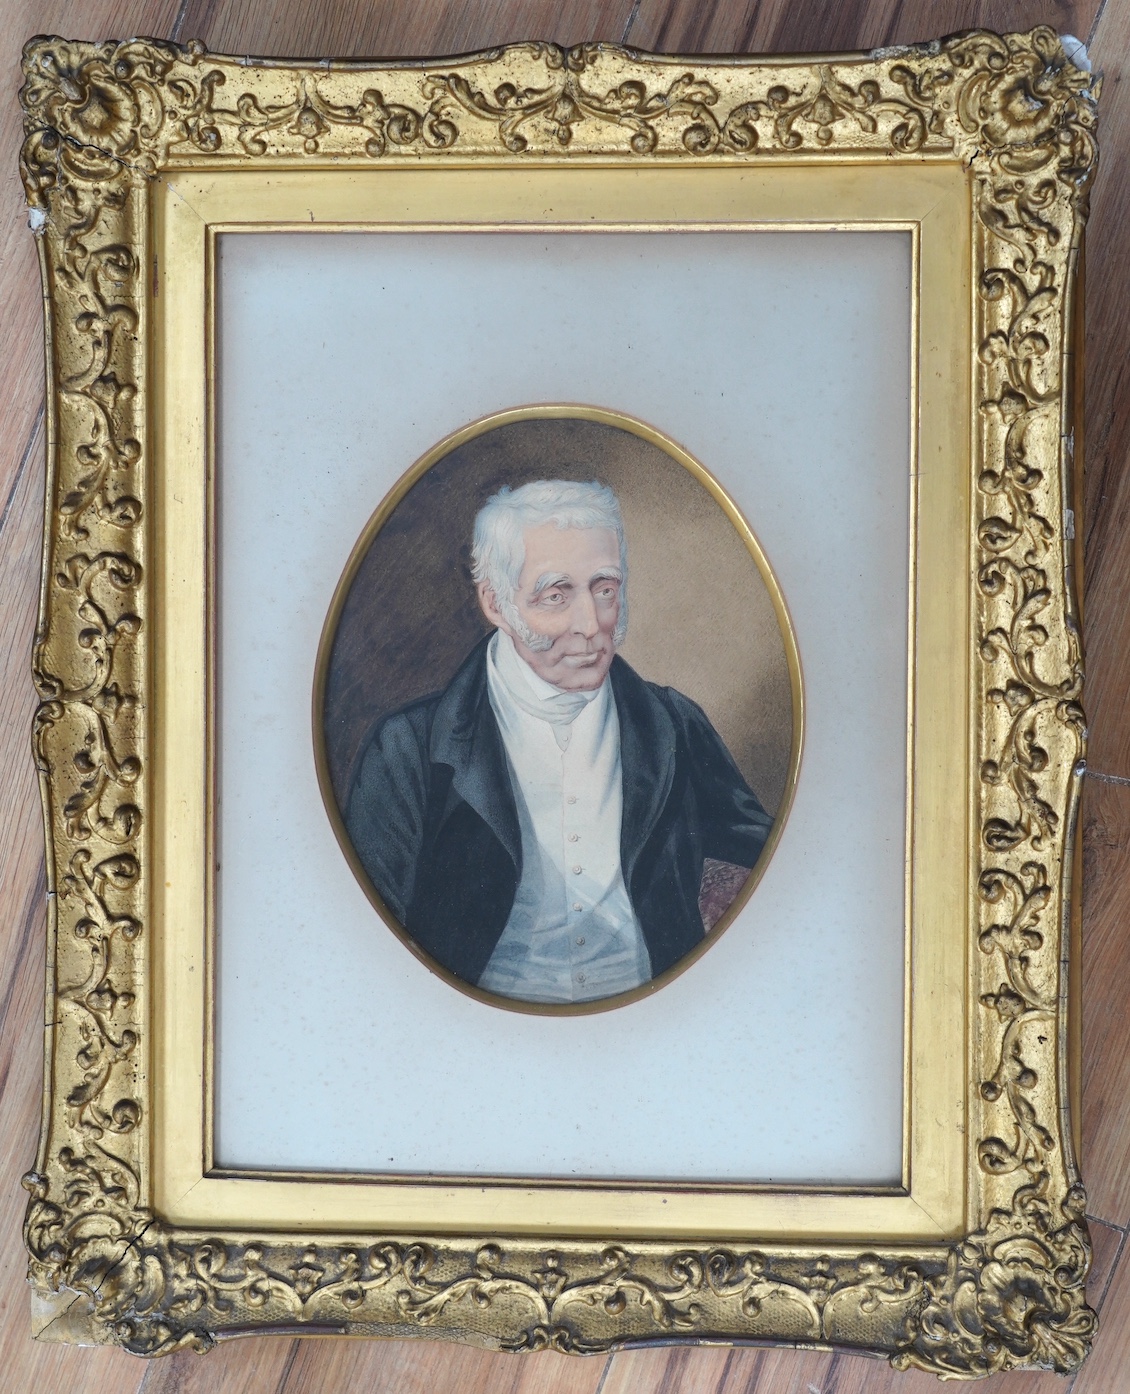 19th century English School, pair of oval watercolours, Portraits of Duke of Wellington and Napoleon Bonaparte, 21 x 16.5cm, gilt framed. Condition - fair, some discolouration and spots of foxing